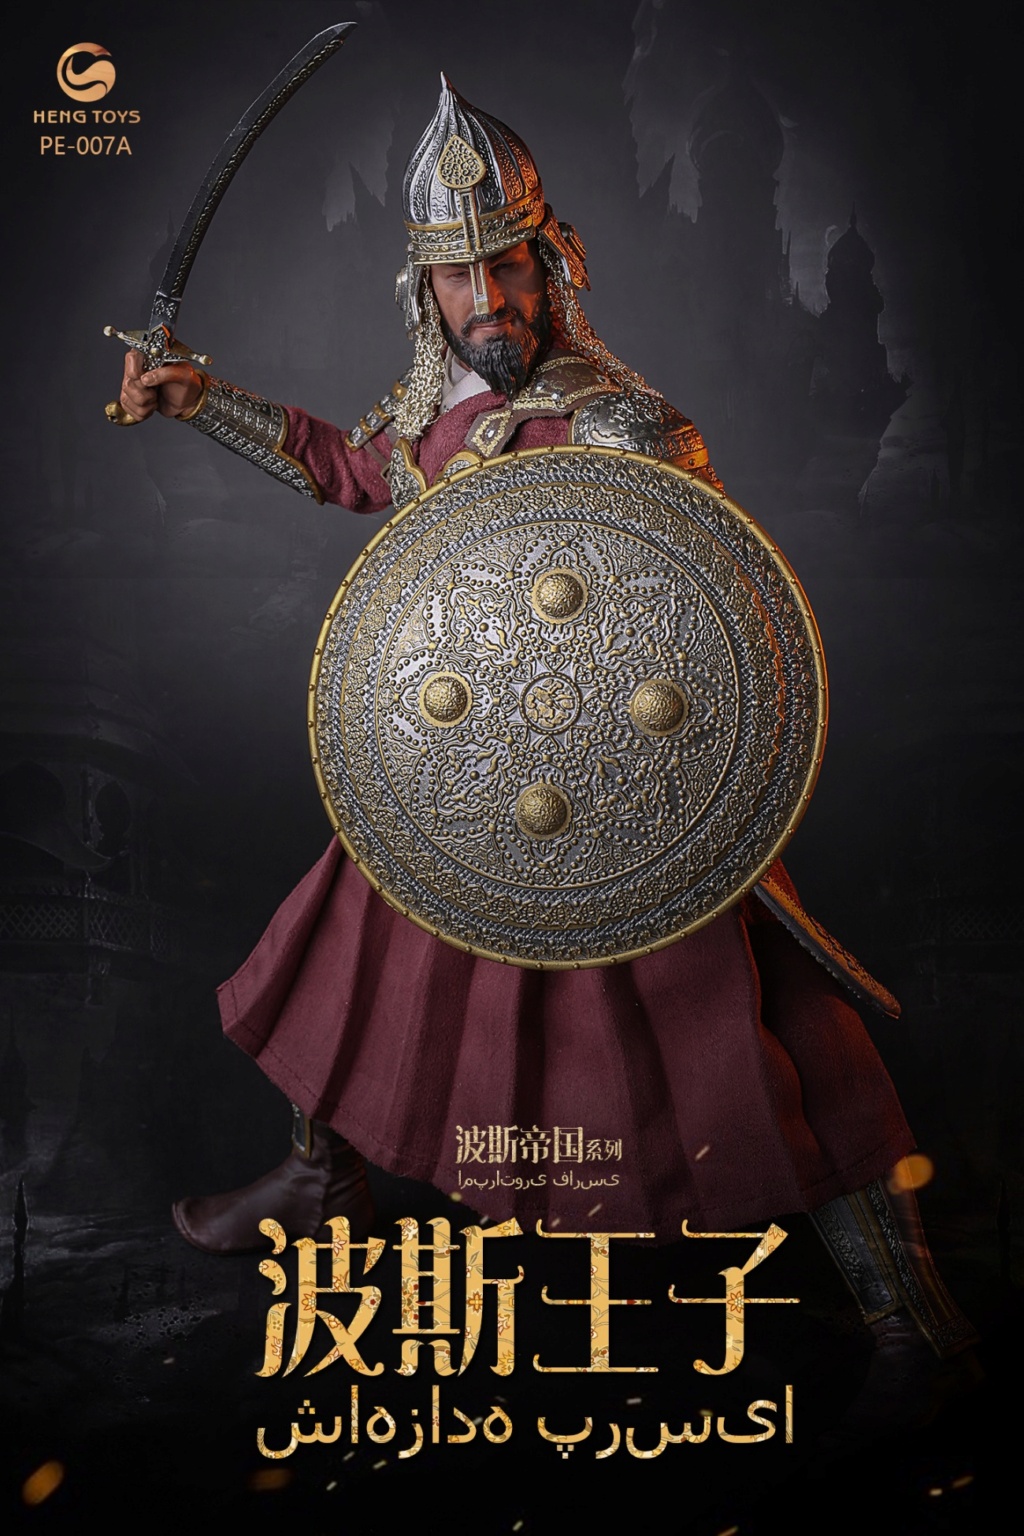 NEW PRODUCT: HengToys: 1/6 Persian Empire Series-Prince of Persia [A & B Section] (#PE-007) 16032811